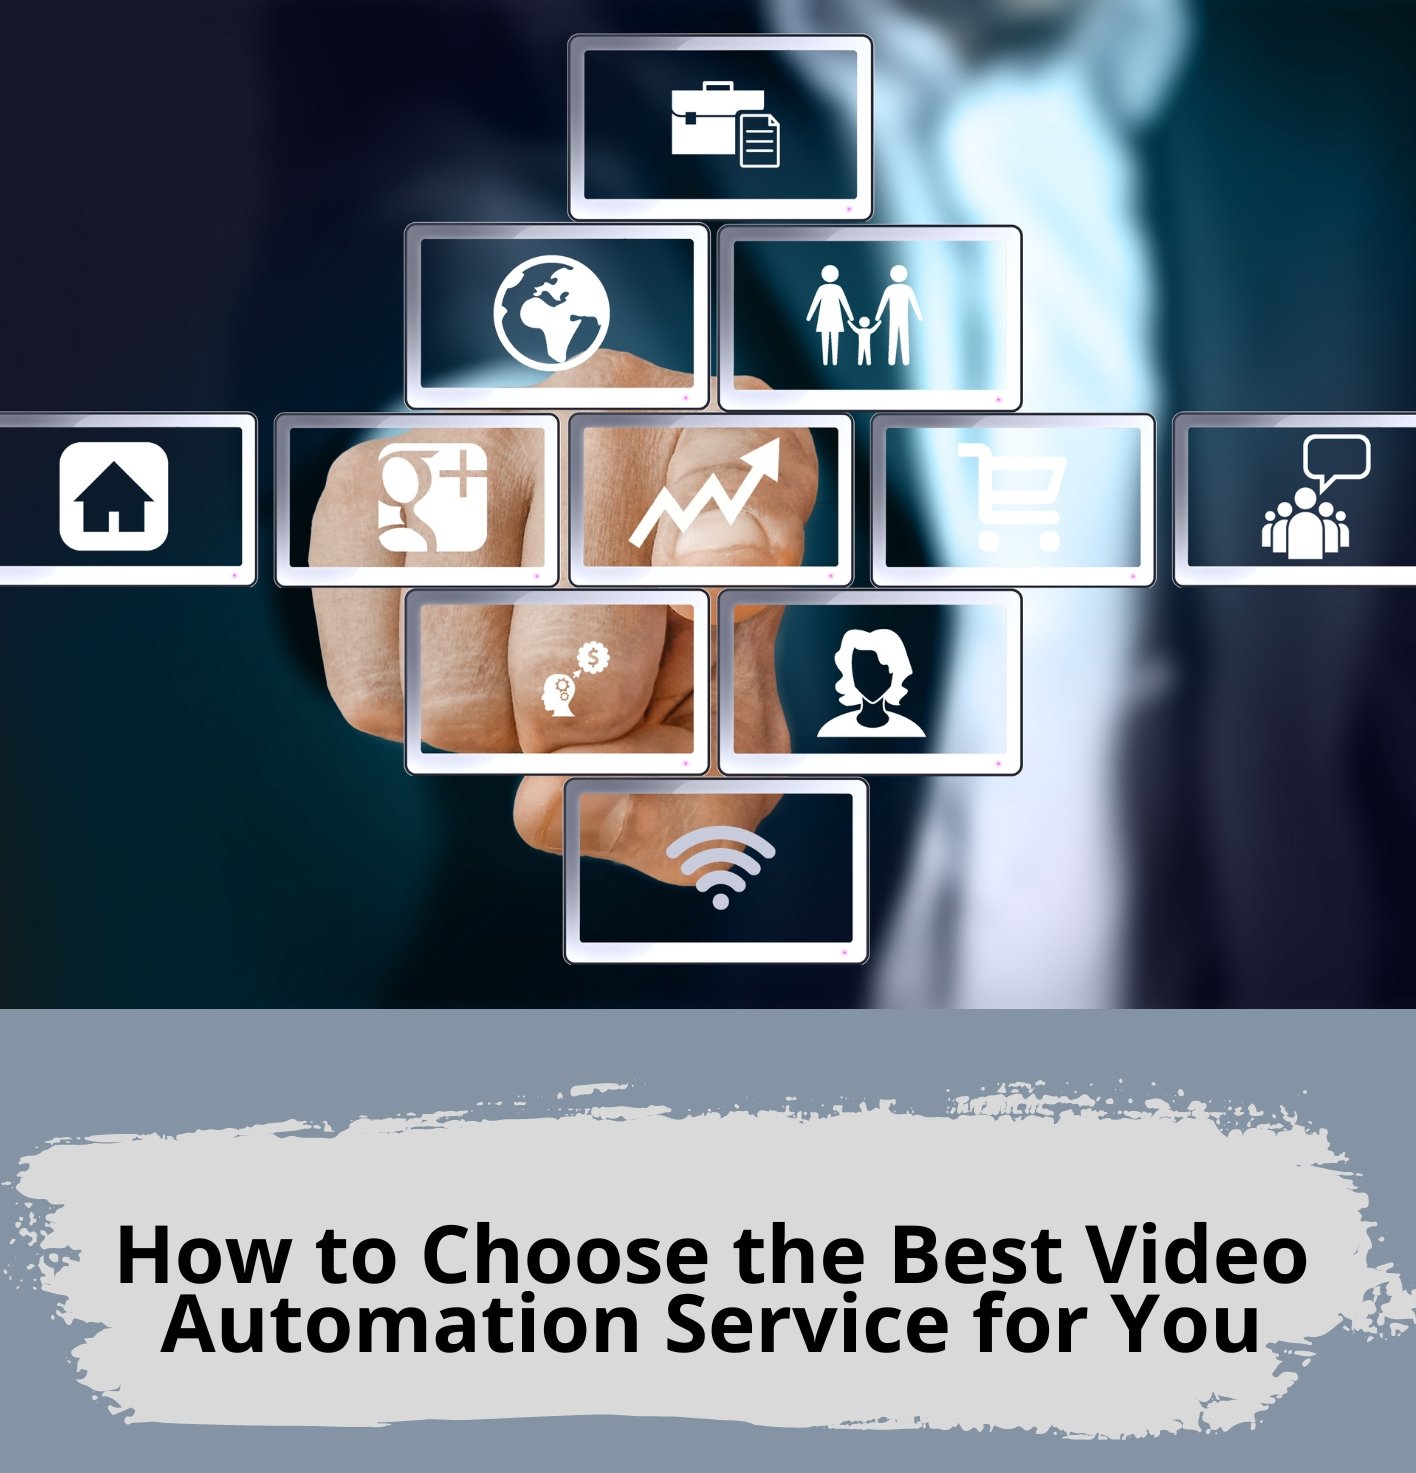 How to Choose the Best Video Automation Service for You